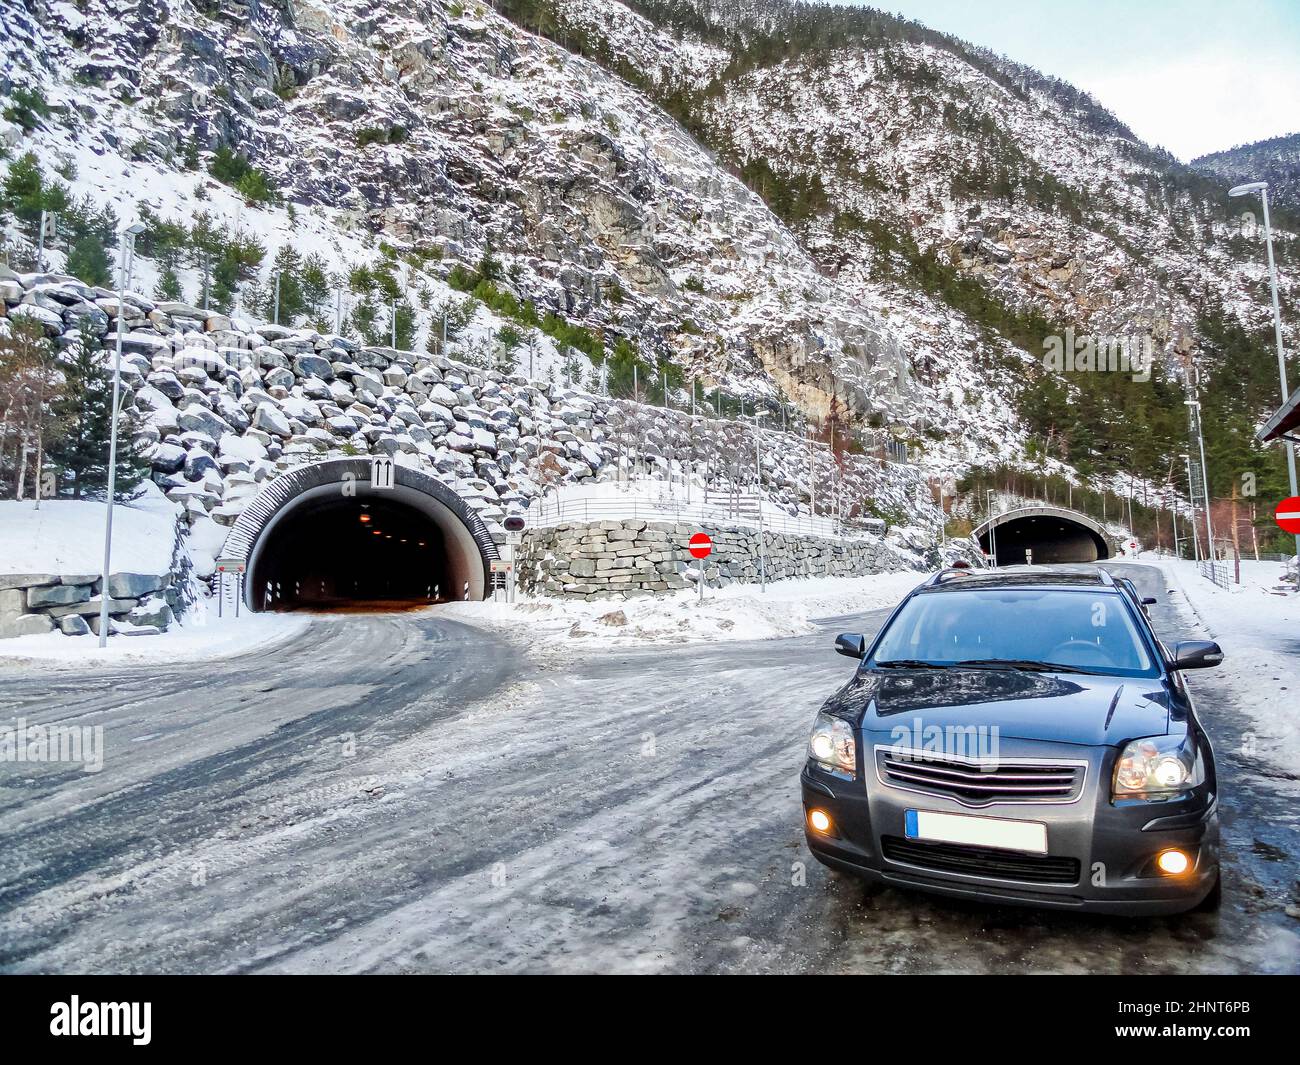 Car in front of a tunnel in winter landscape of Norway. Stock Photo